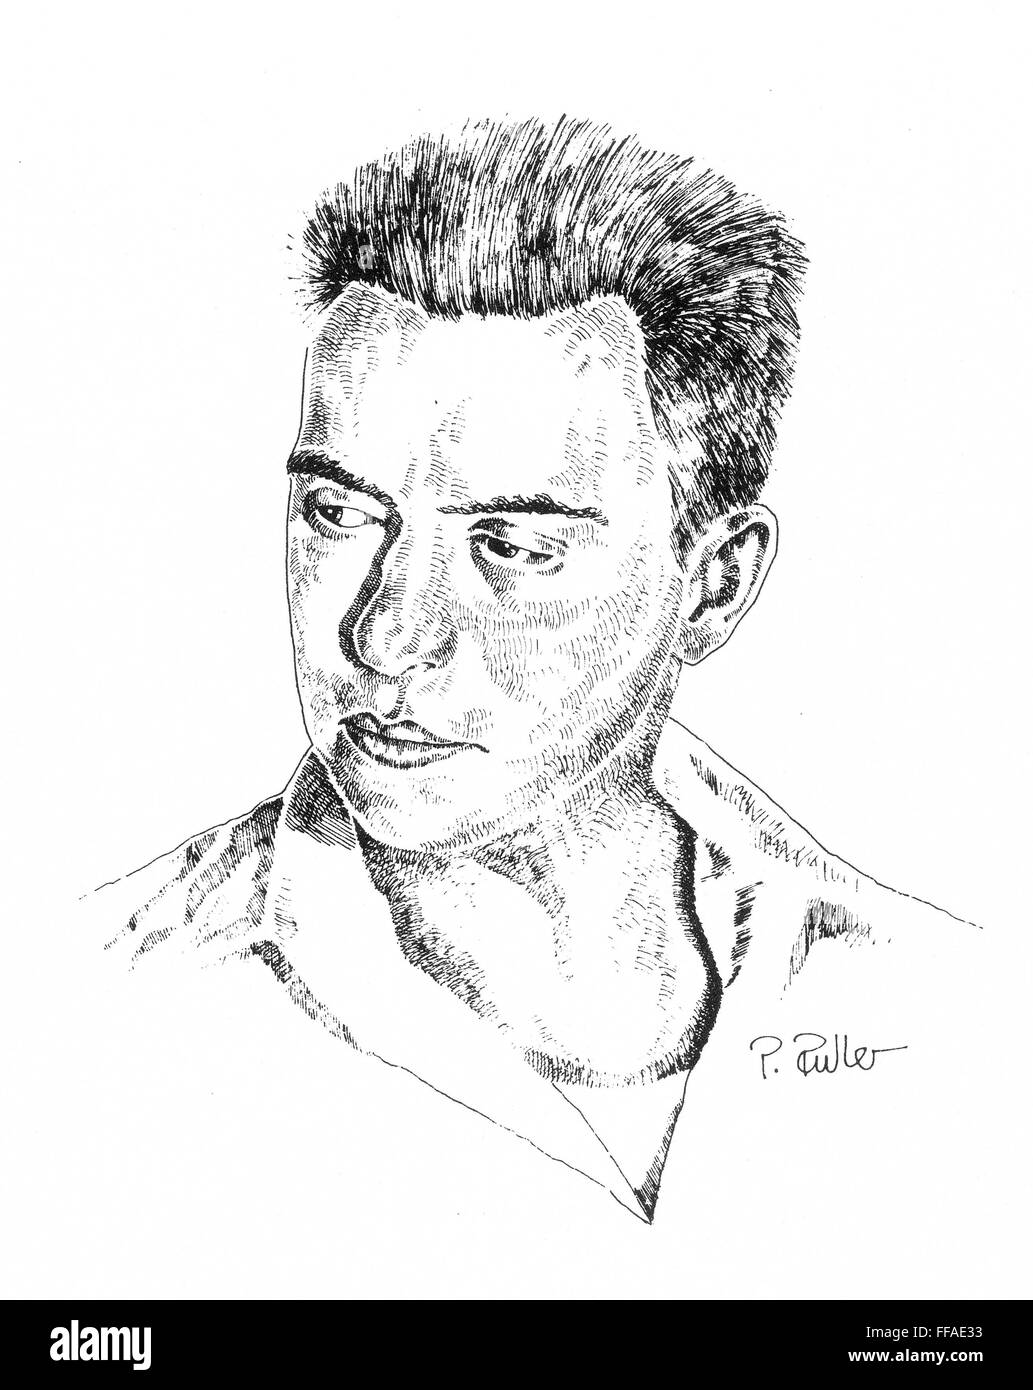 HART CRANE (1899-1932). /nAmerican poet. Pen-and-ink drawing by P. Puller. Stock Photo